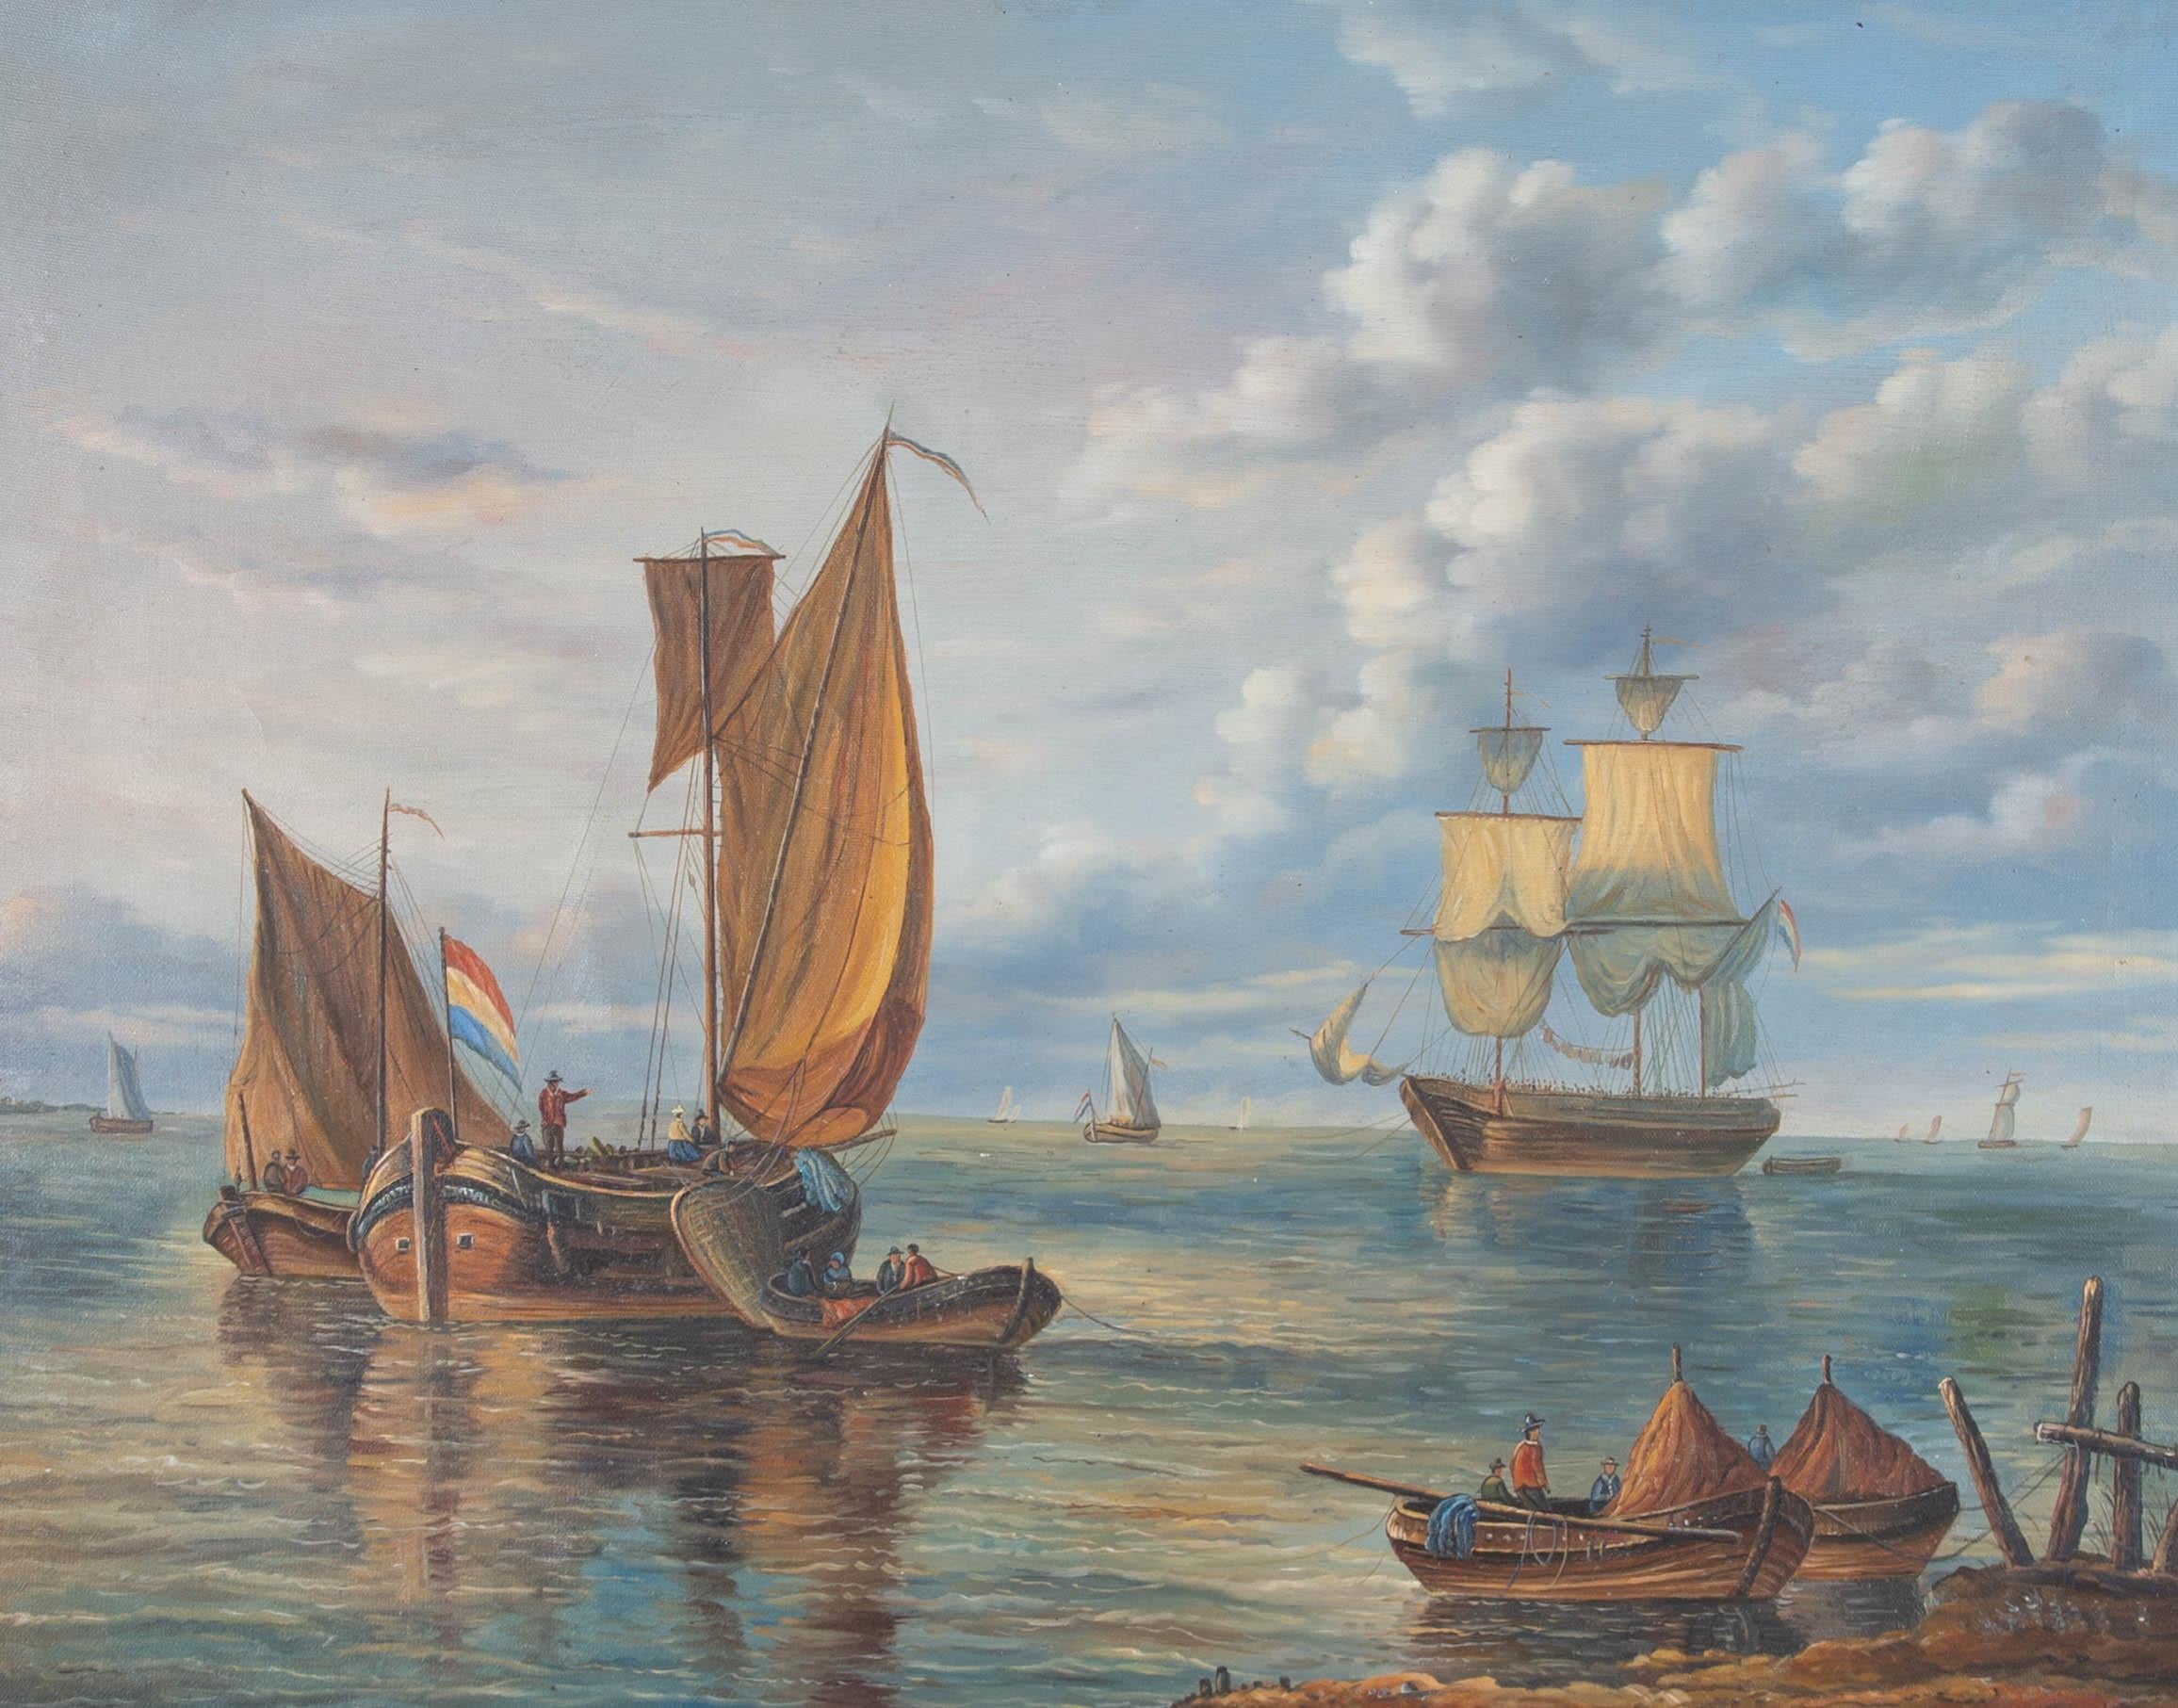 20th Century Oil - Dutch Barges and a Brig Schooner - Brown Figurative Painting by Unknown